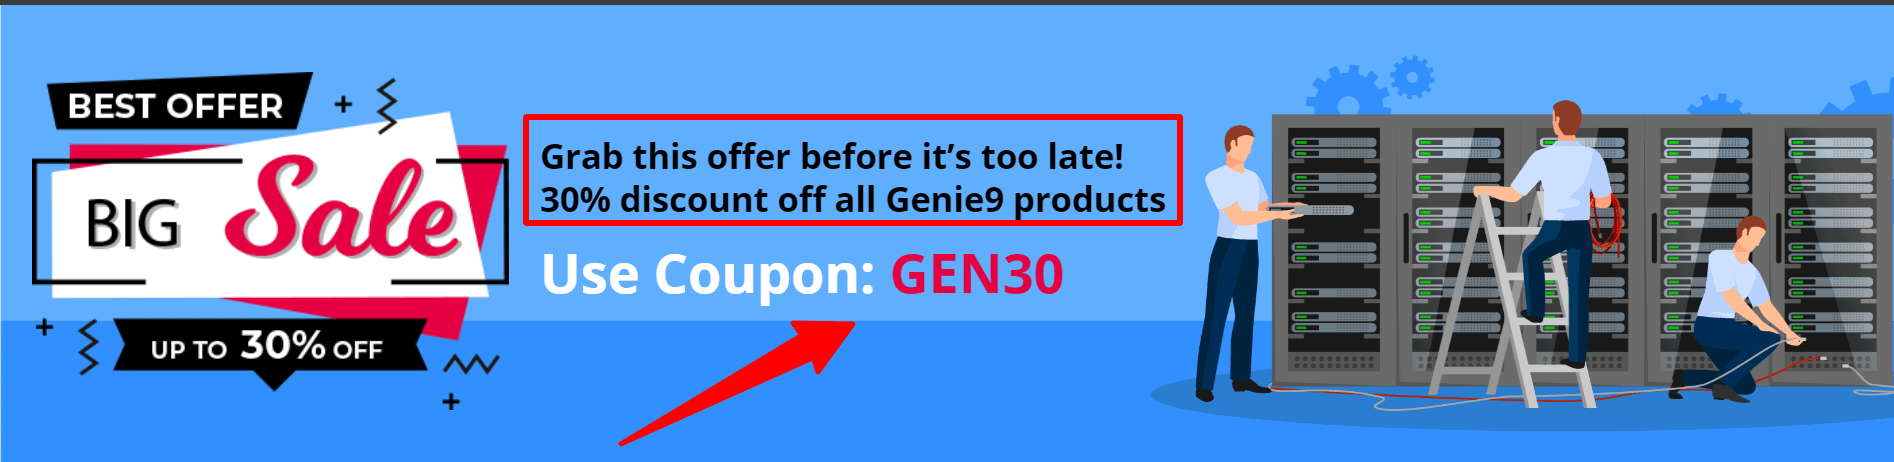 Business-Users-Genie9-Local-Backup-Products